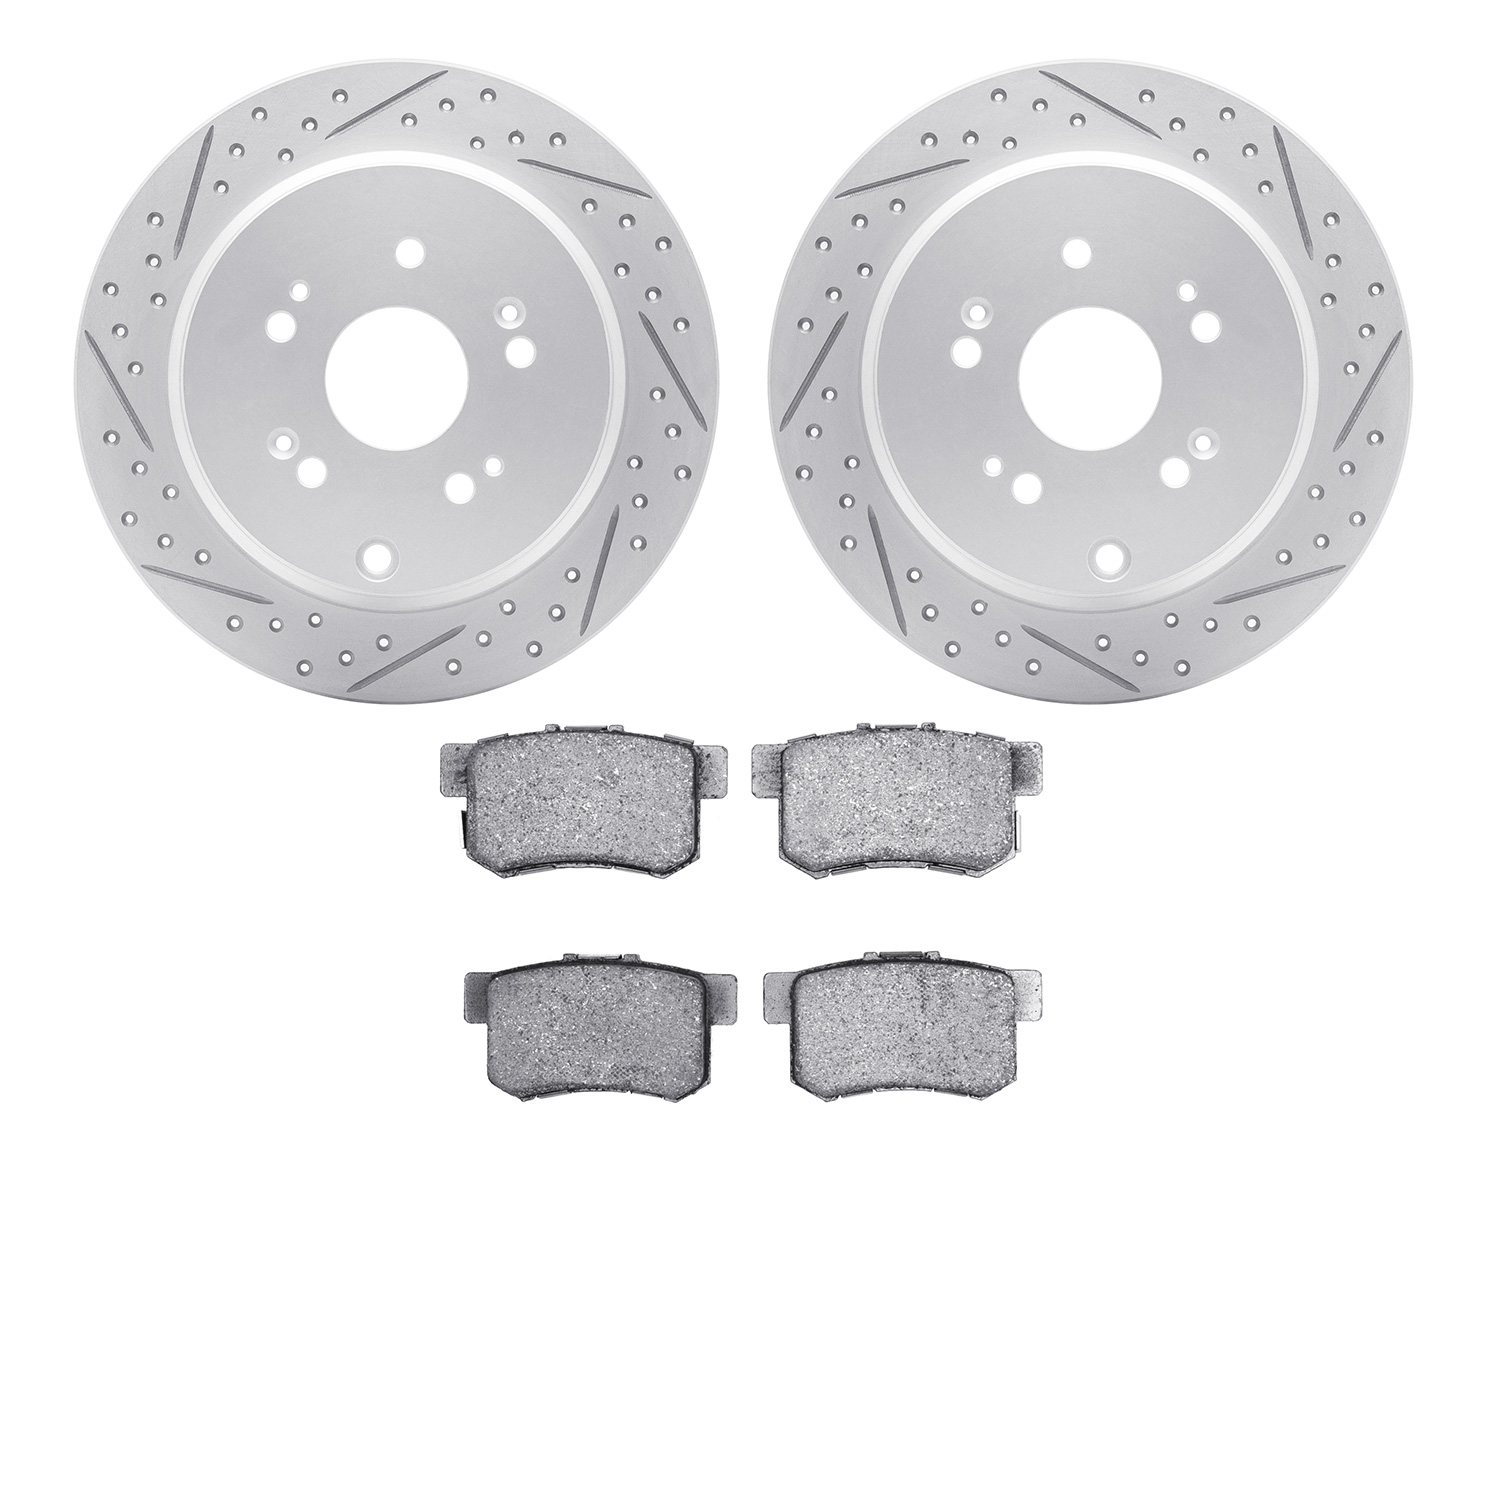 2502-59076 Geoperformance Drilled/Slotted Rotors w/5000 Advanced Brake Pads Kit, 2005-2018 Acura/Honda, Position: Rear